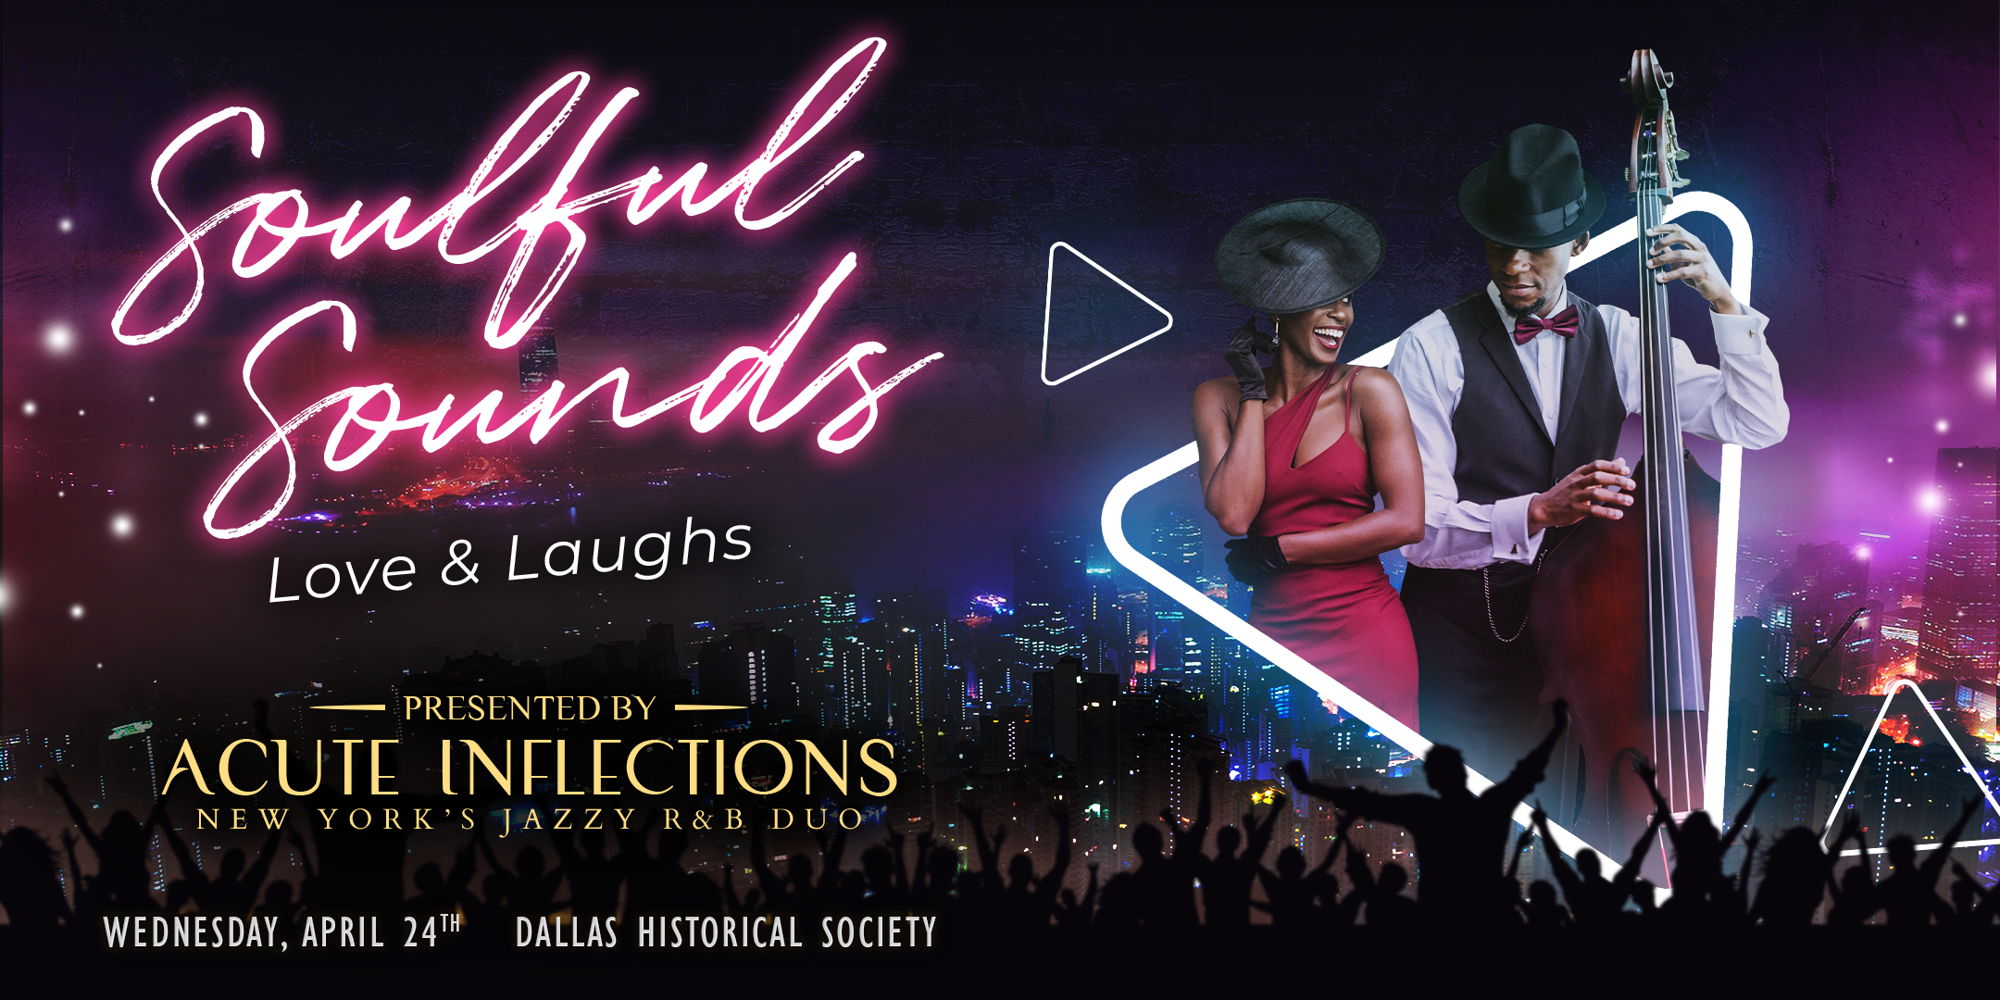 Soulful Sounds in Dallas promotional image